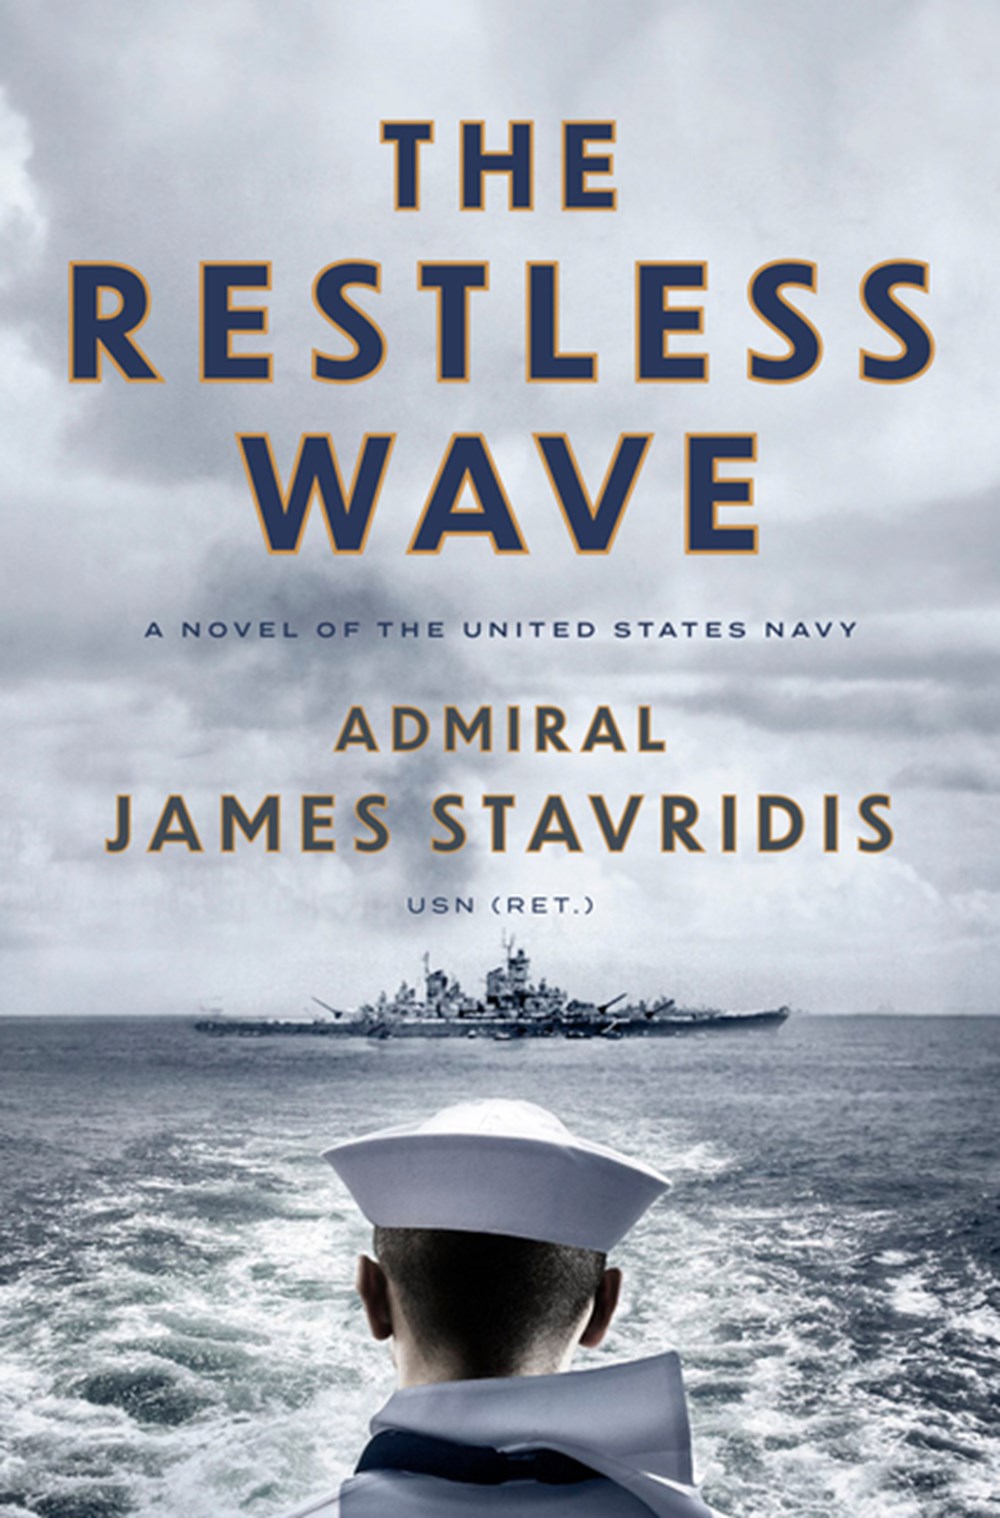 Restless Wave: A Novel of the United States Navy